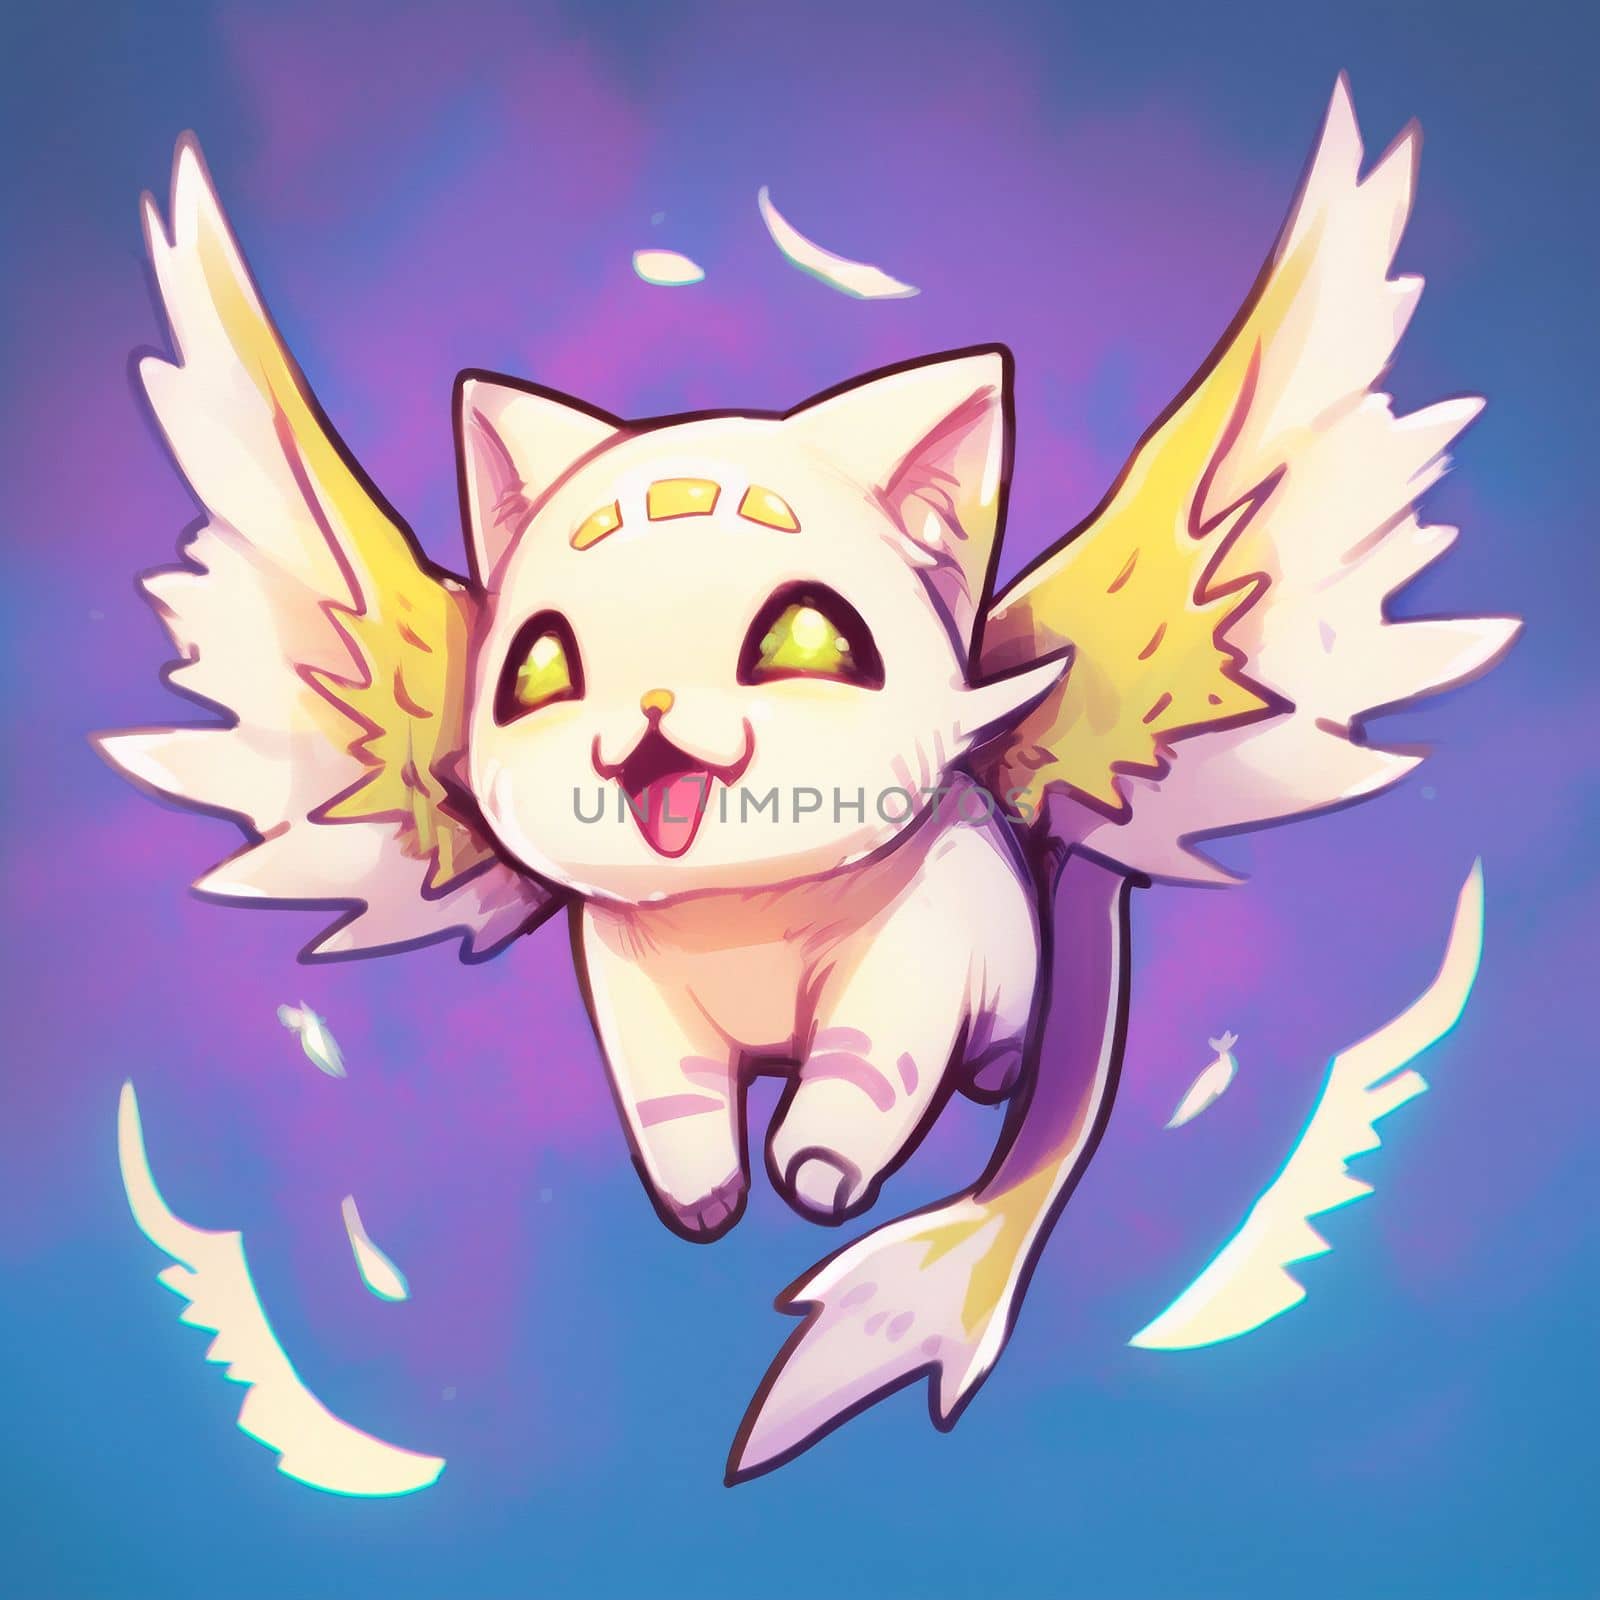 Angel cat with wings by NeuroSky